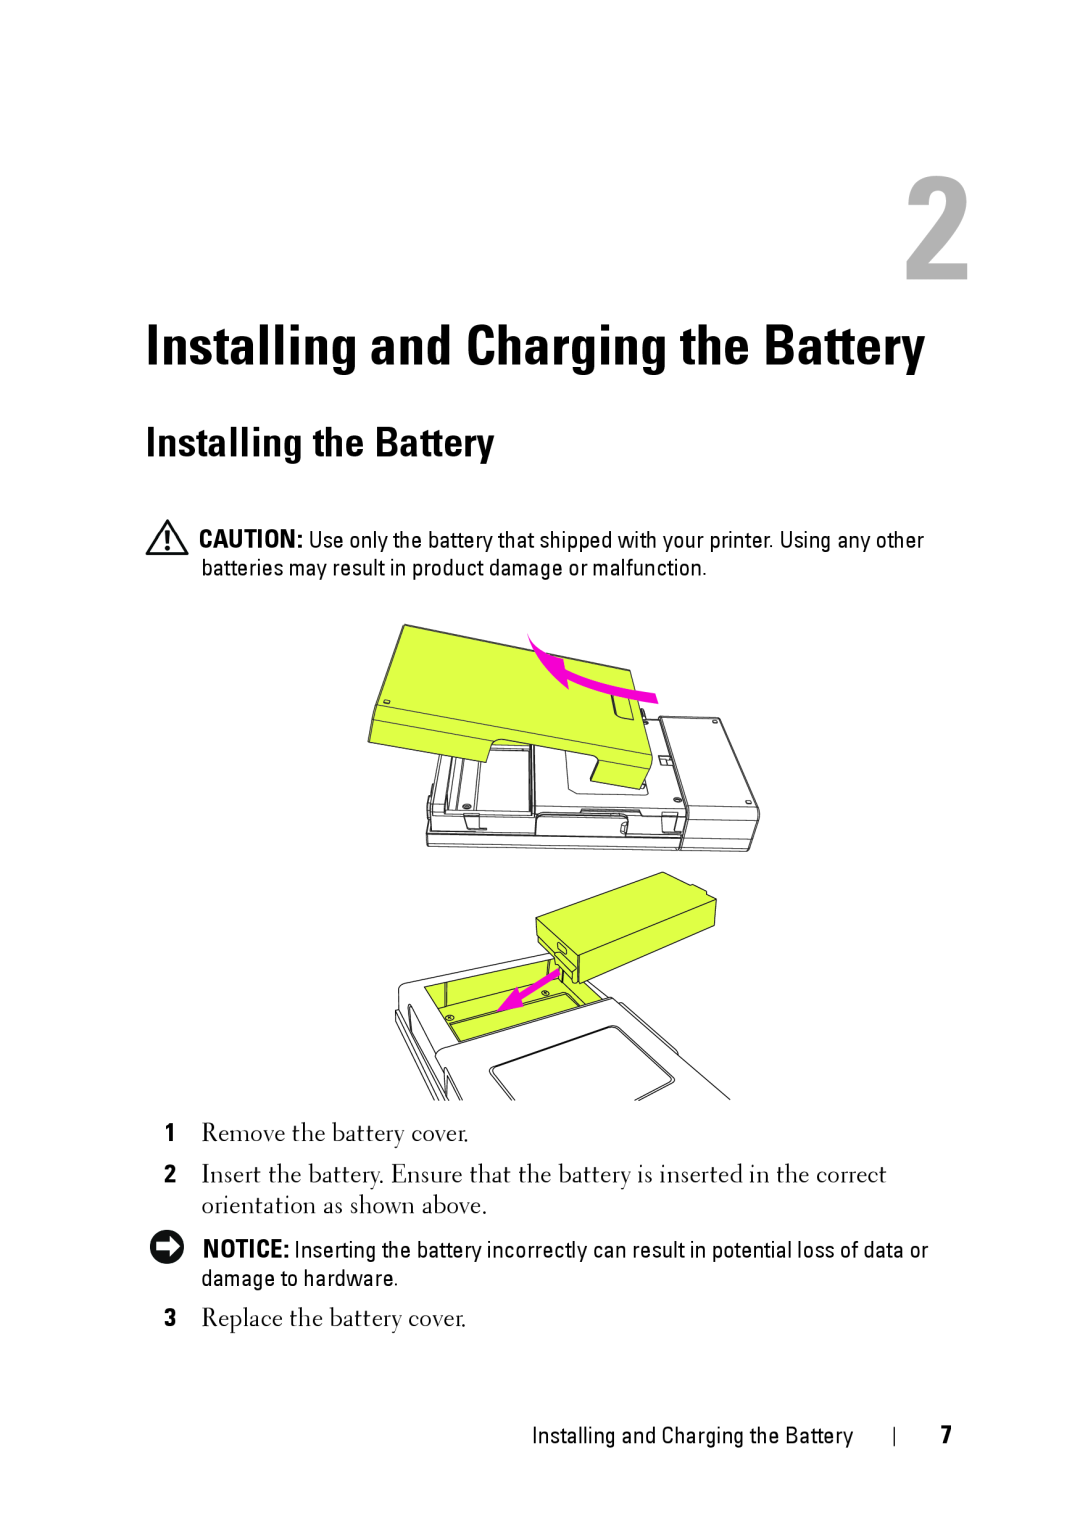 Dell PZ310 manual Installing and Charging the Battery, Installing the Battery 